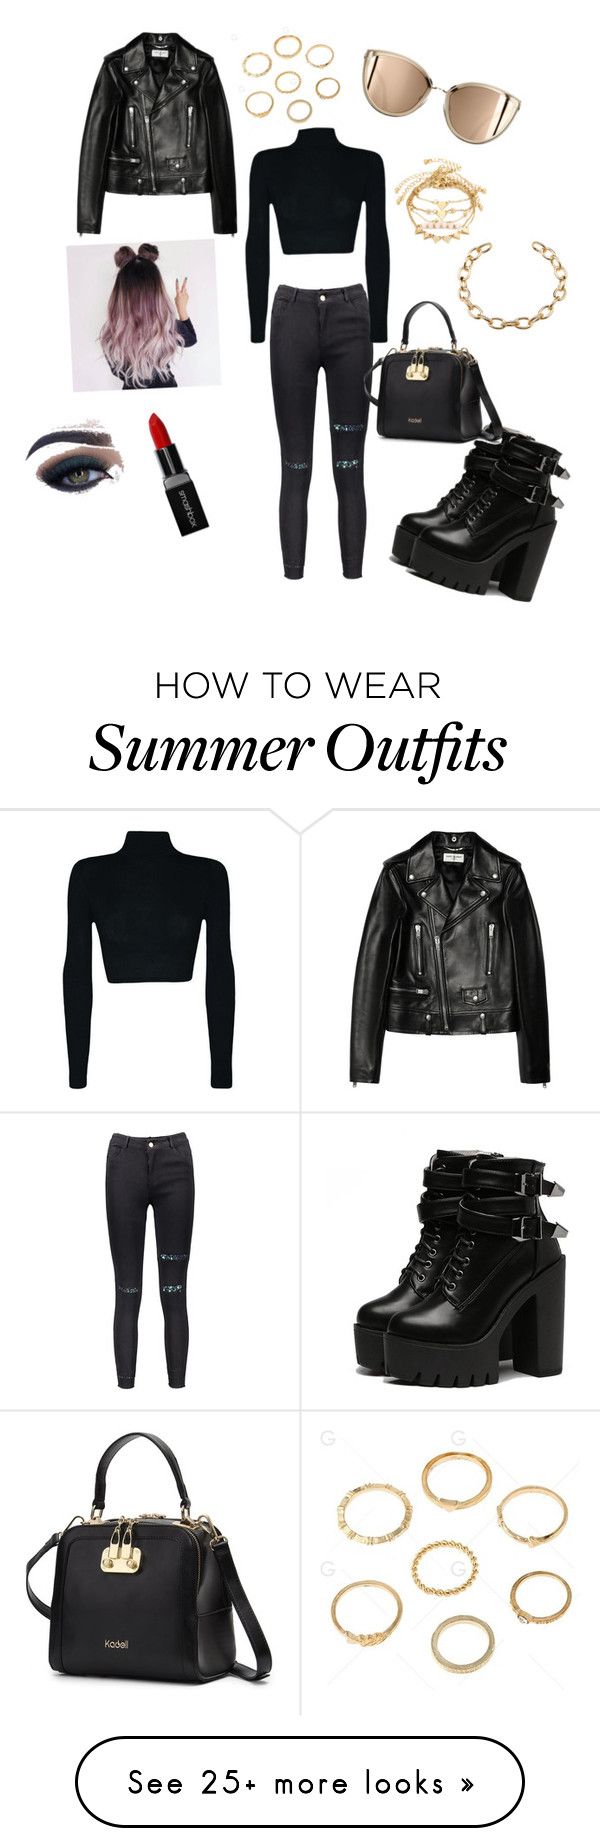 "dream outfit" by evian16 on Polyvore featuring Yves Saint Laurent, To...